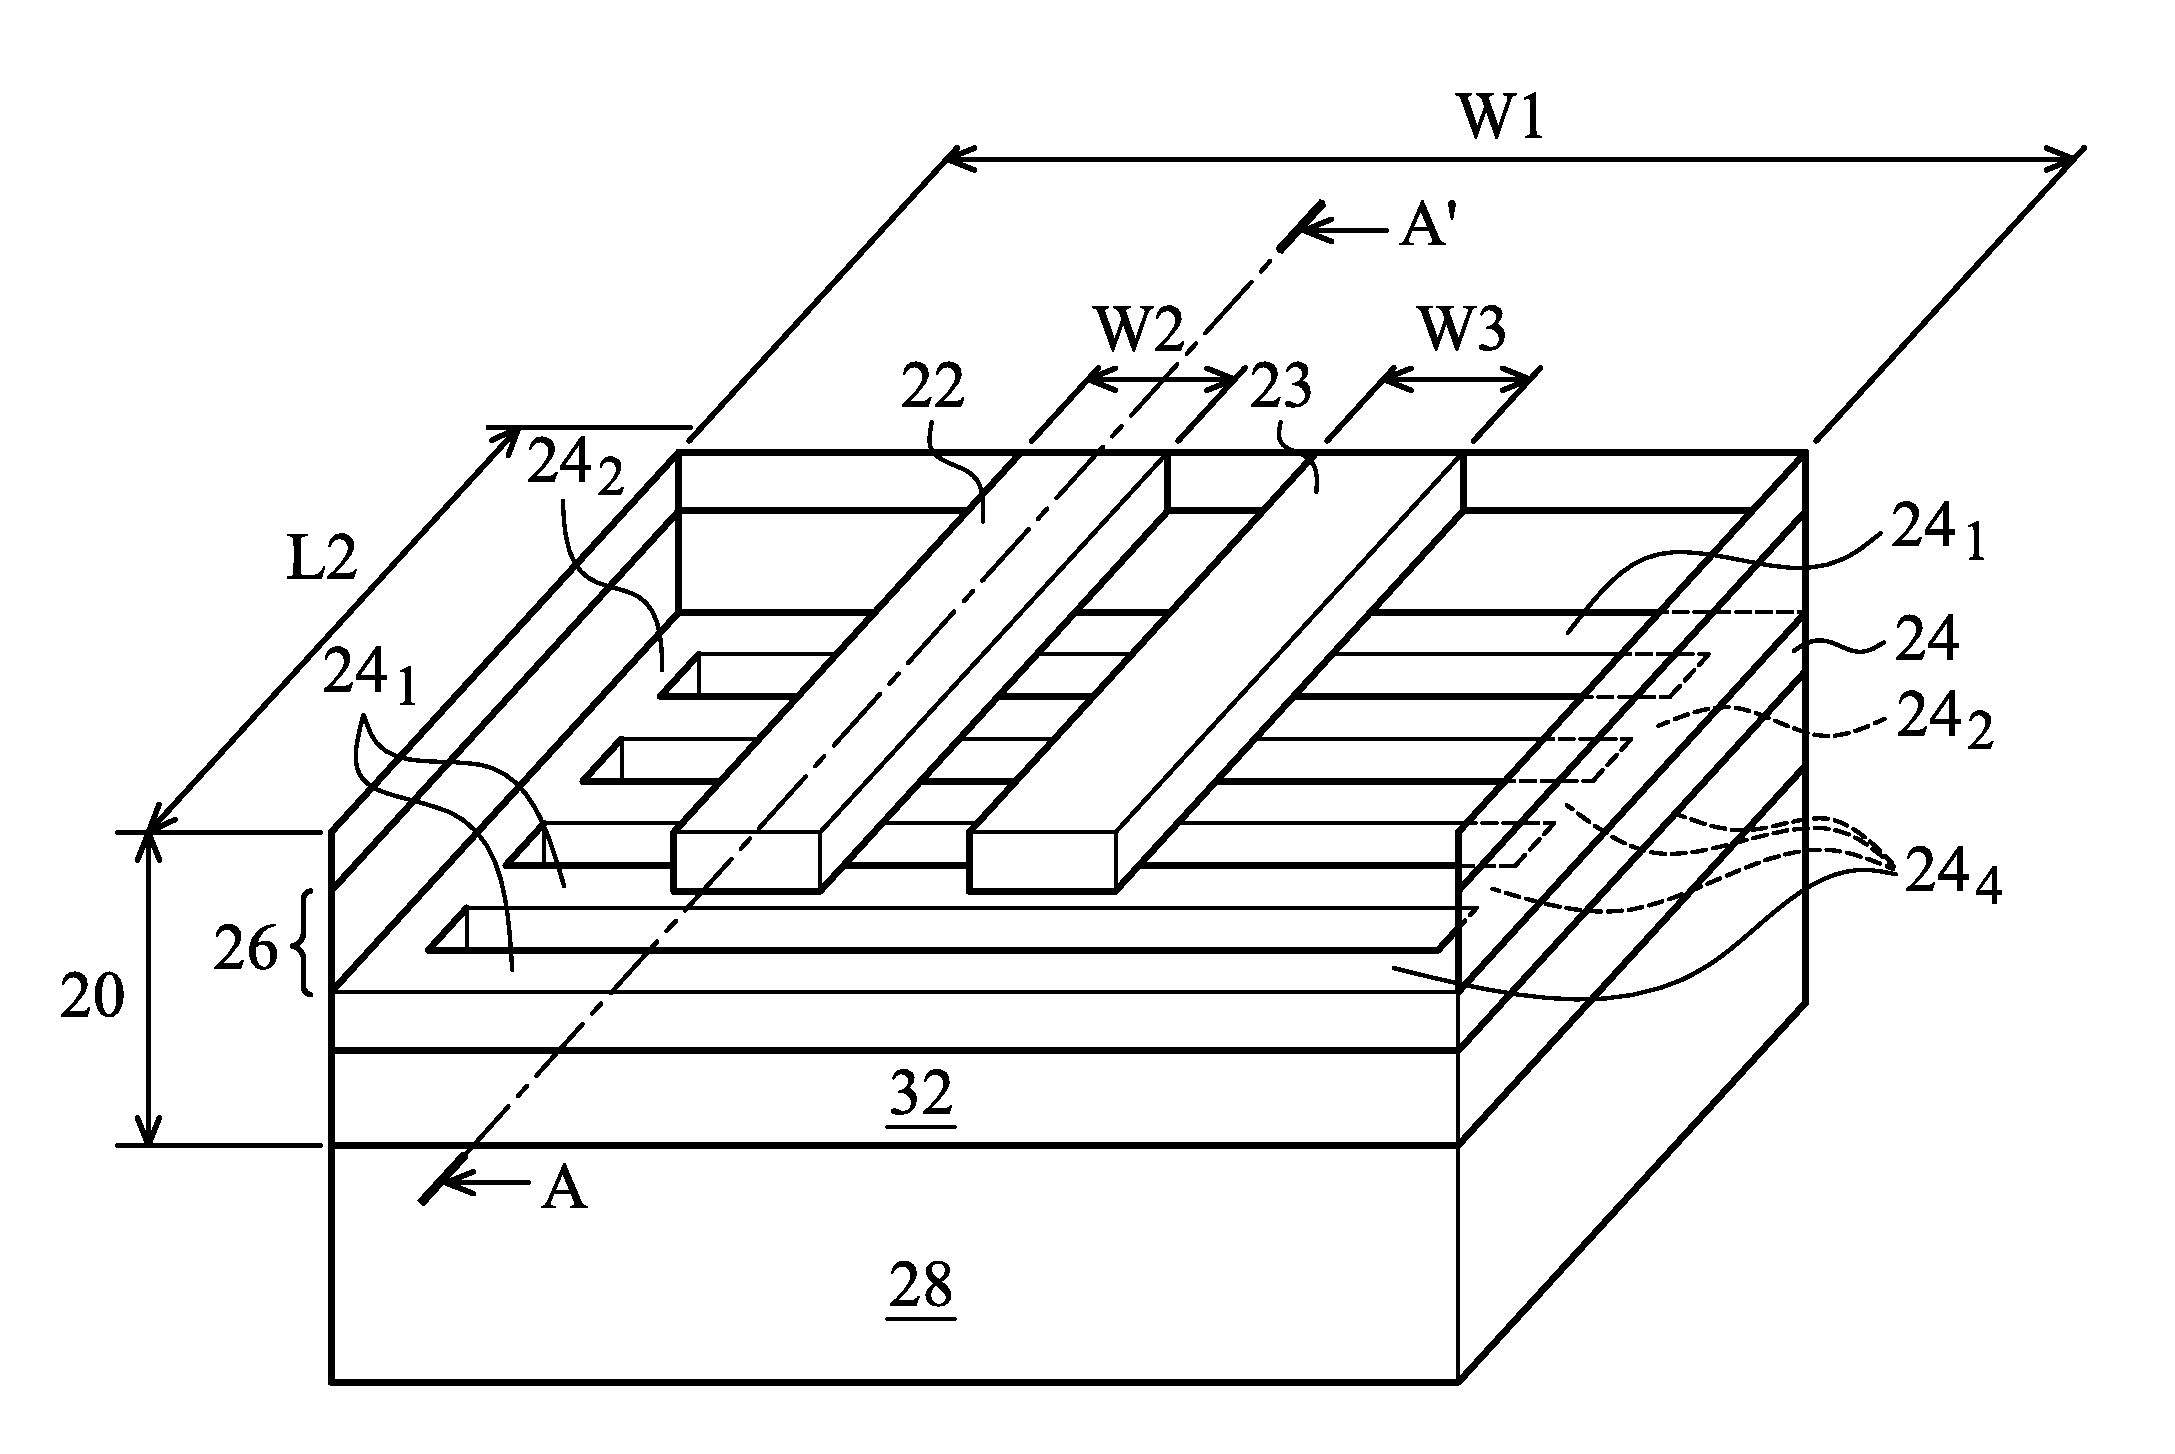 Coupled Microstrip Lines with Tunable Characteristic Impedance and Wavelength